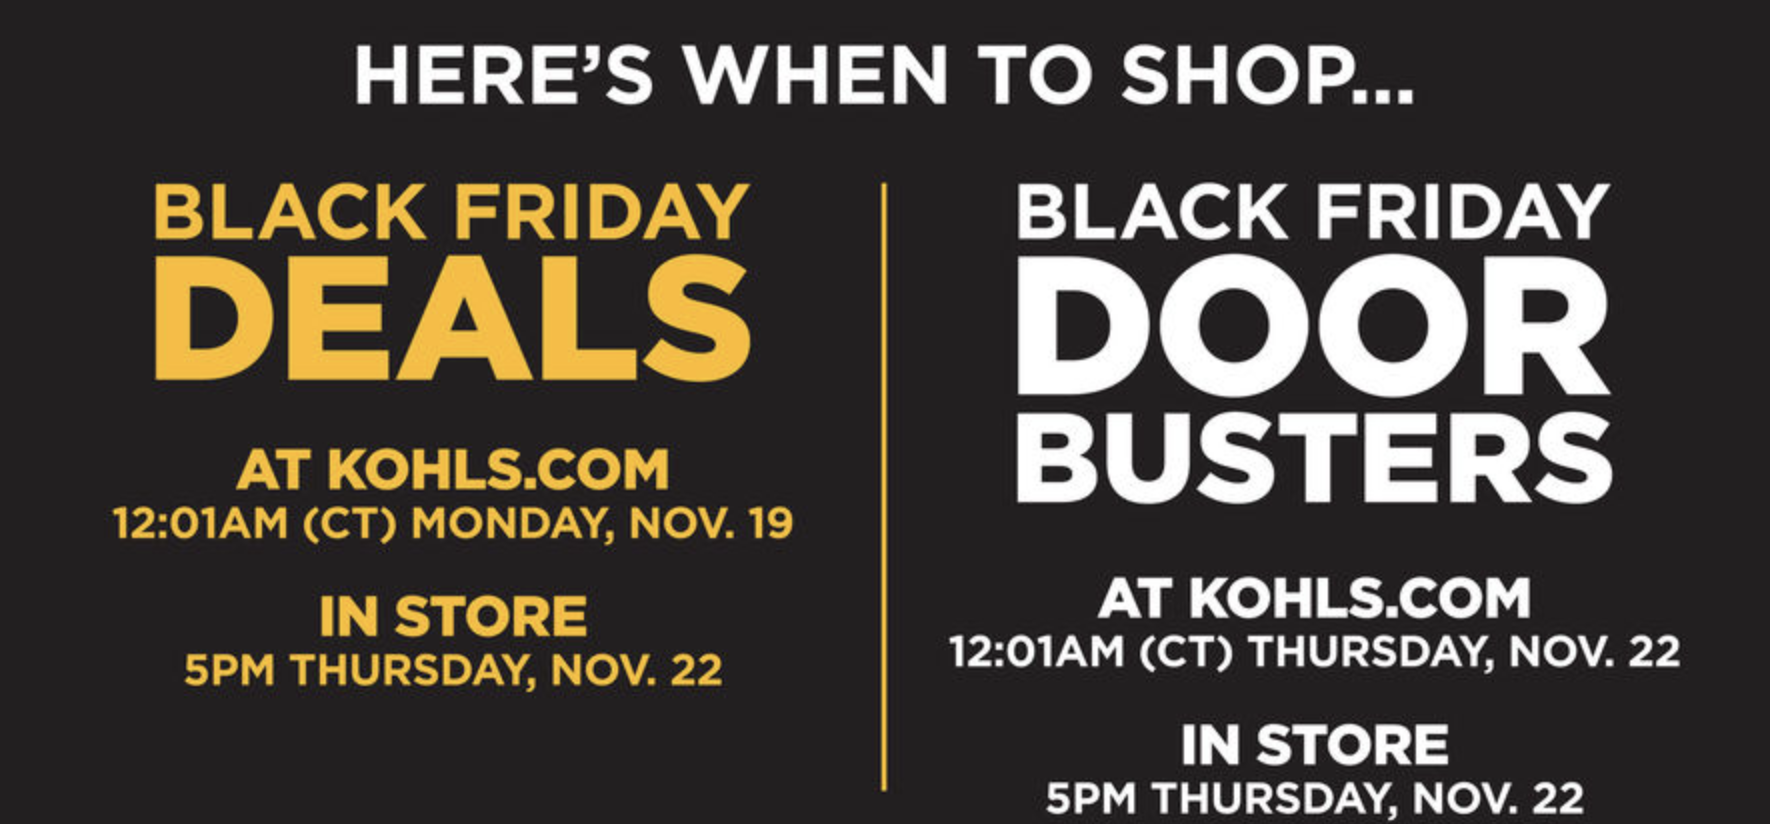 The Kohl's Black Friday Ad Is Here and These Are the Best Deals - Does Nordstrom Run Black Friday Deals